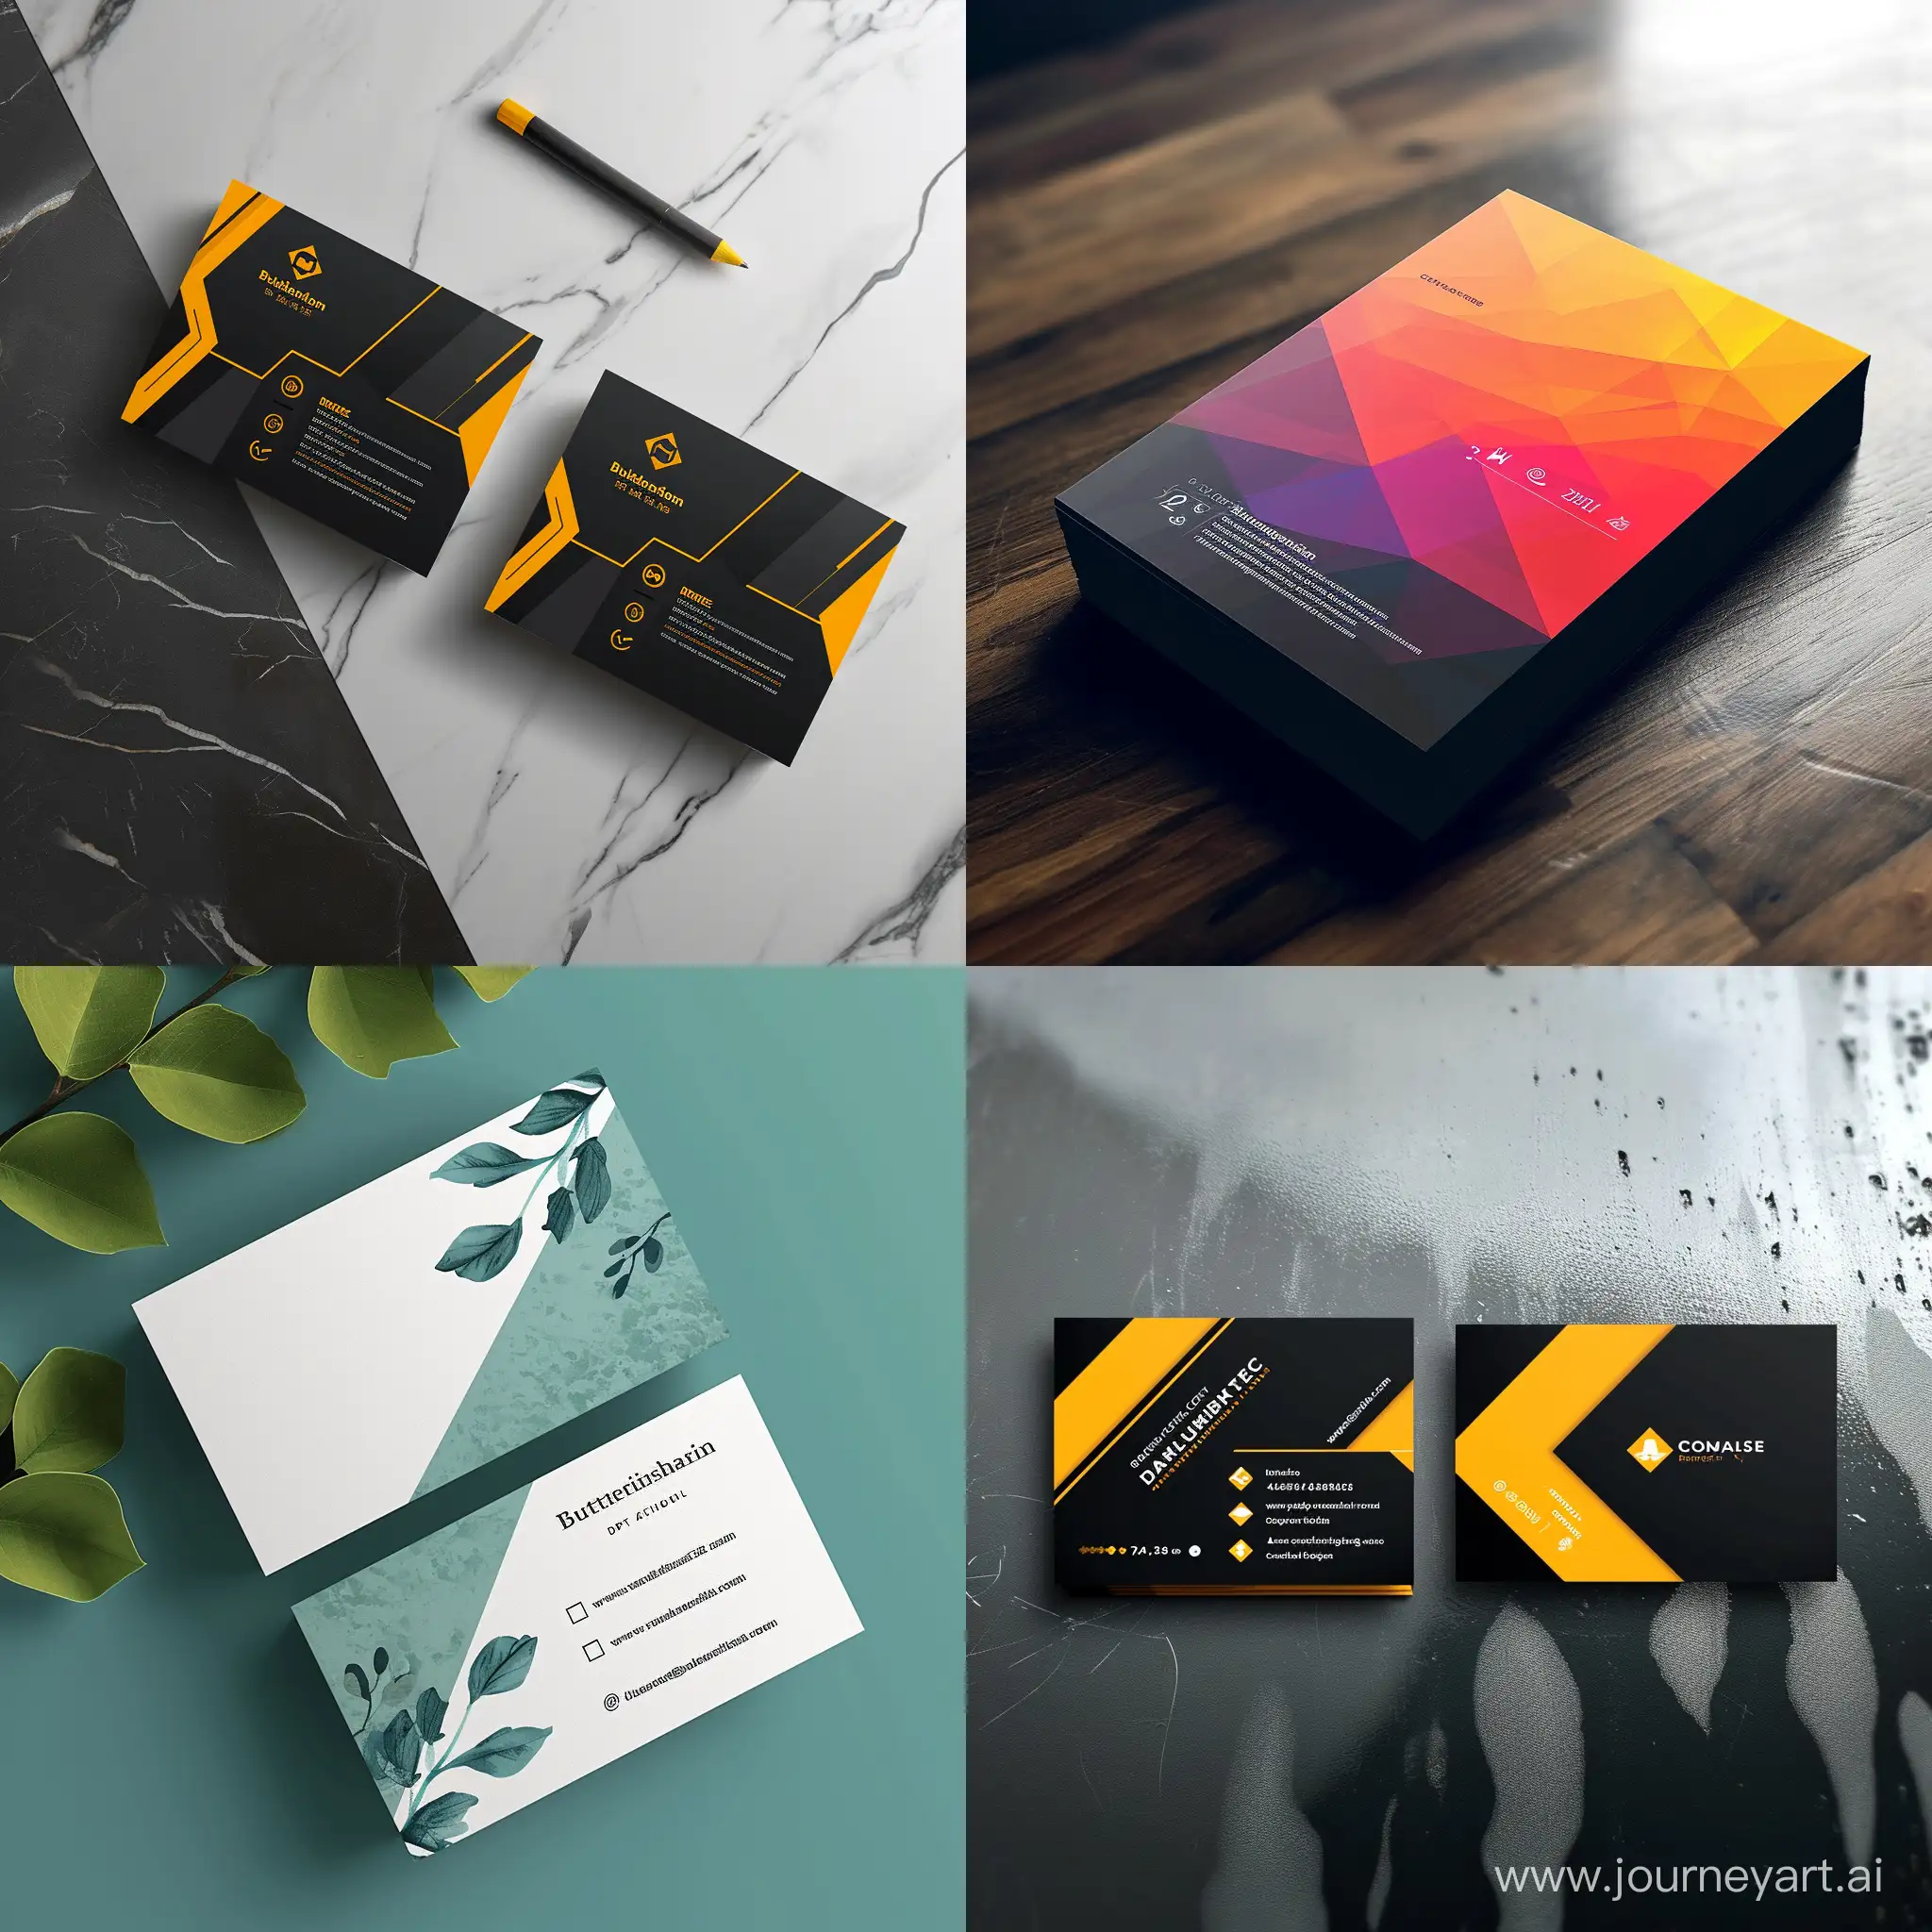 Professional-Digital-Business-Cards-Design-with-Version-6-Aspect-Ratio-11